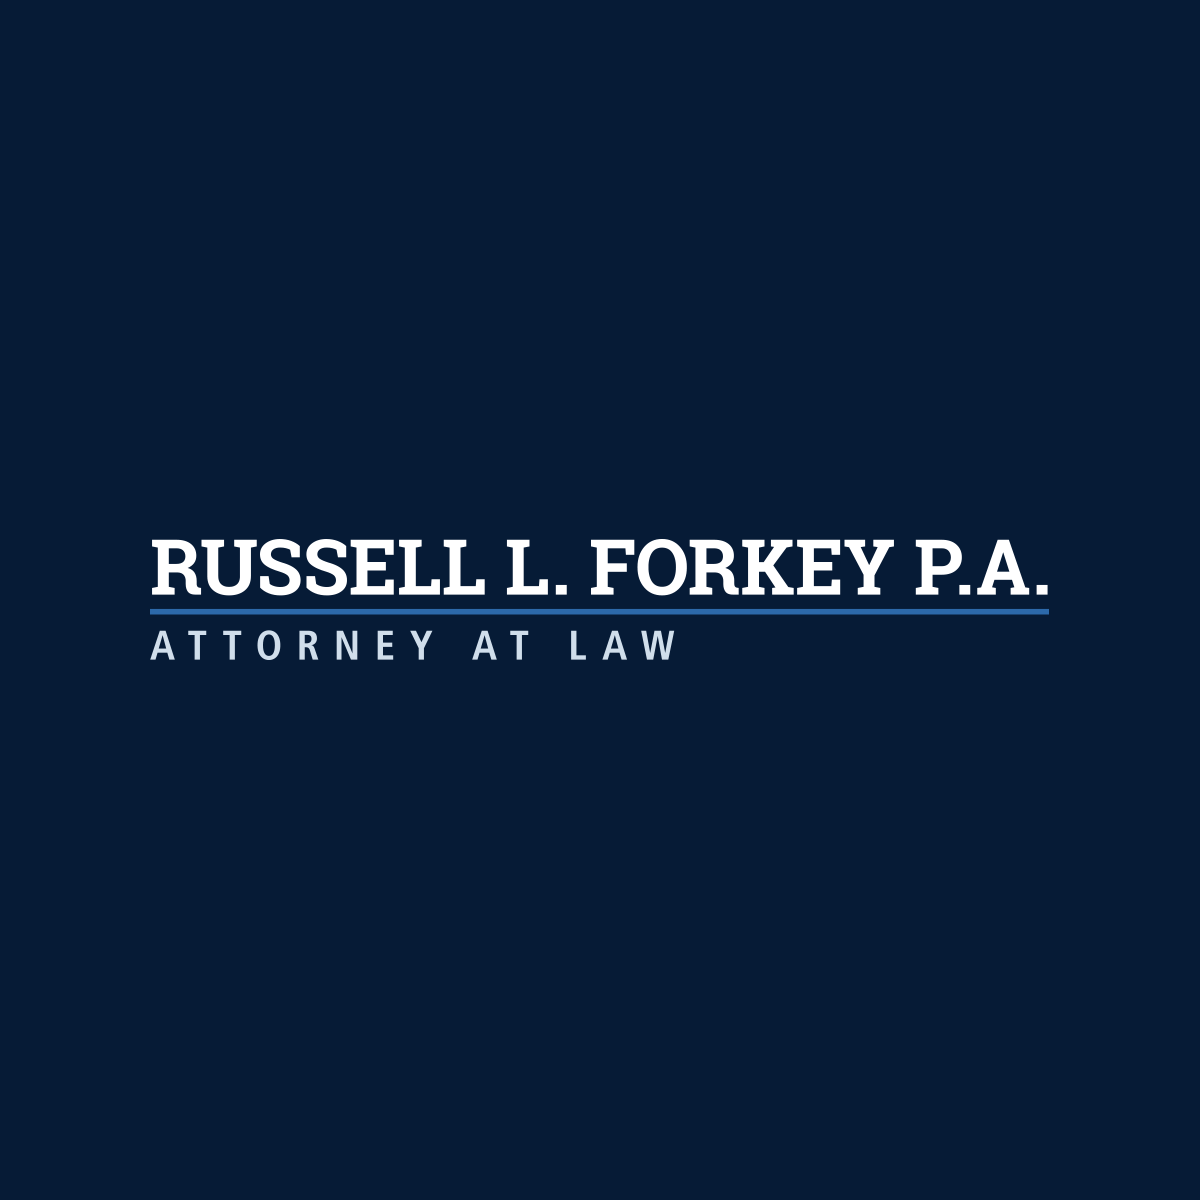 Russell L. Forkey P.A.